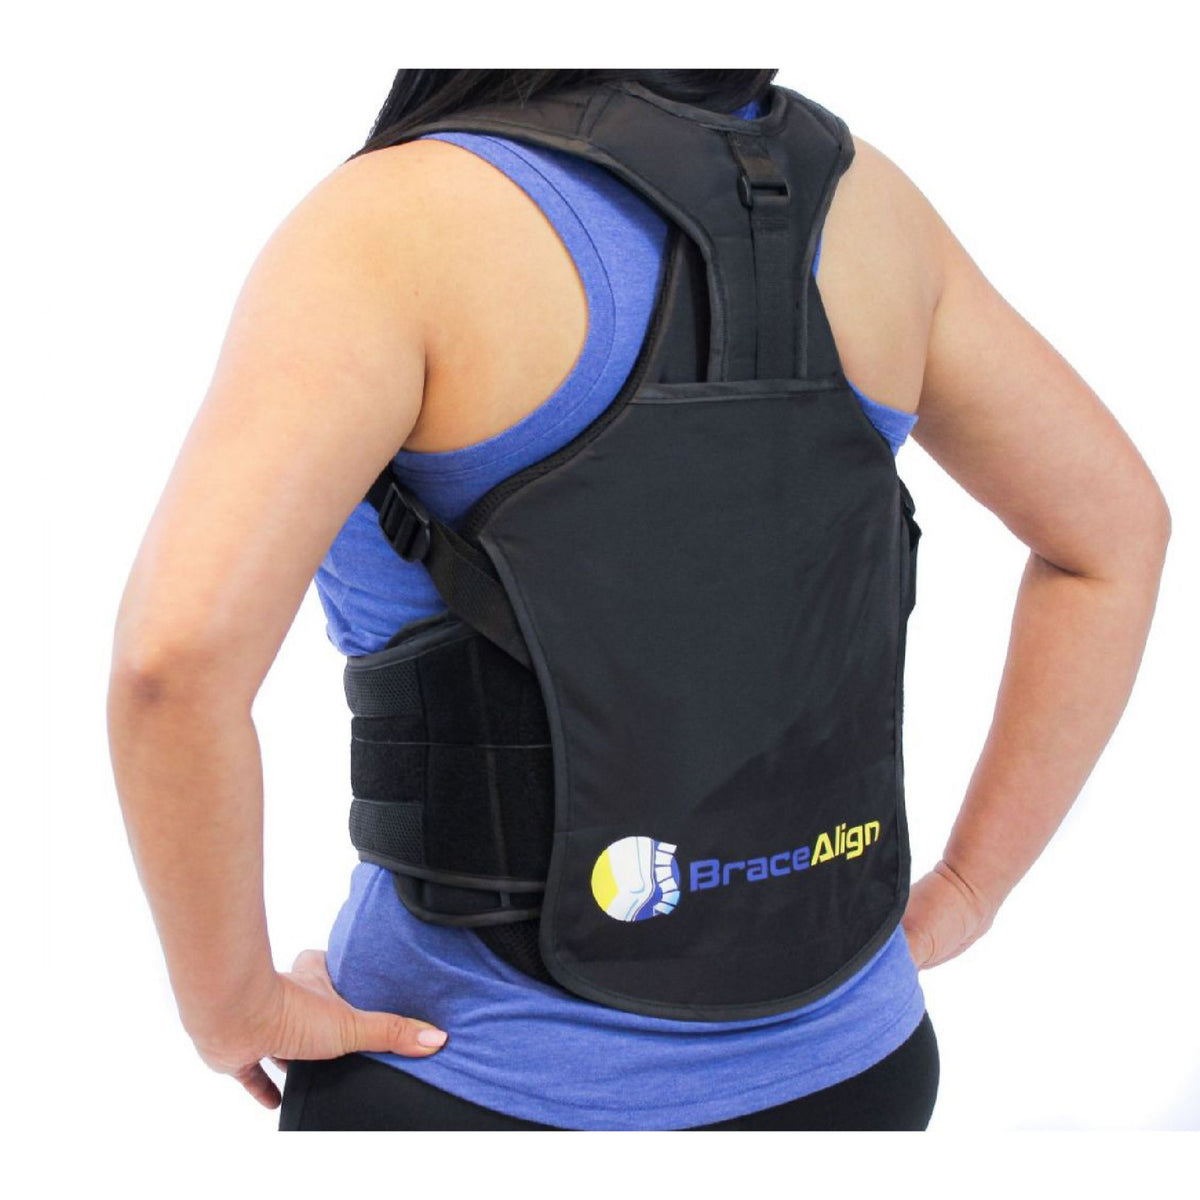 TLSO Thoracic Back Brace for Pain Relief - L0456 L0457 Certified